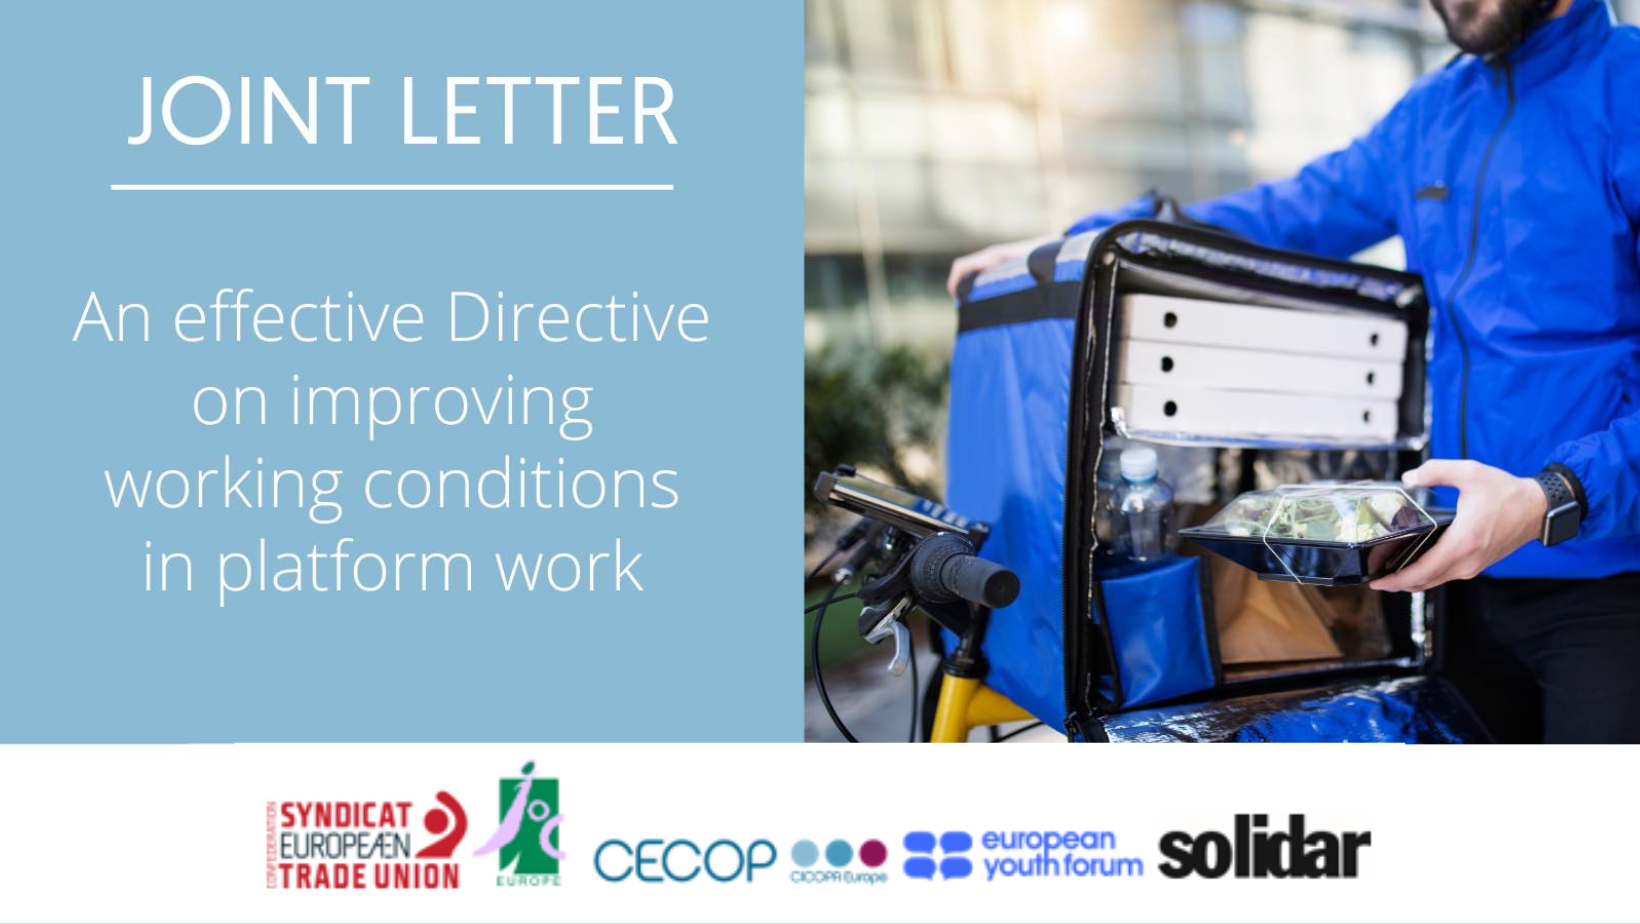 Joint letter for an effective Directive on improving conditions in platform work